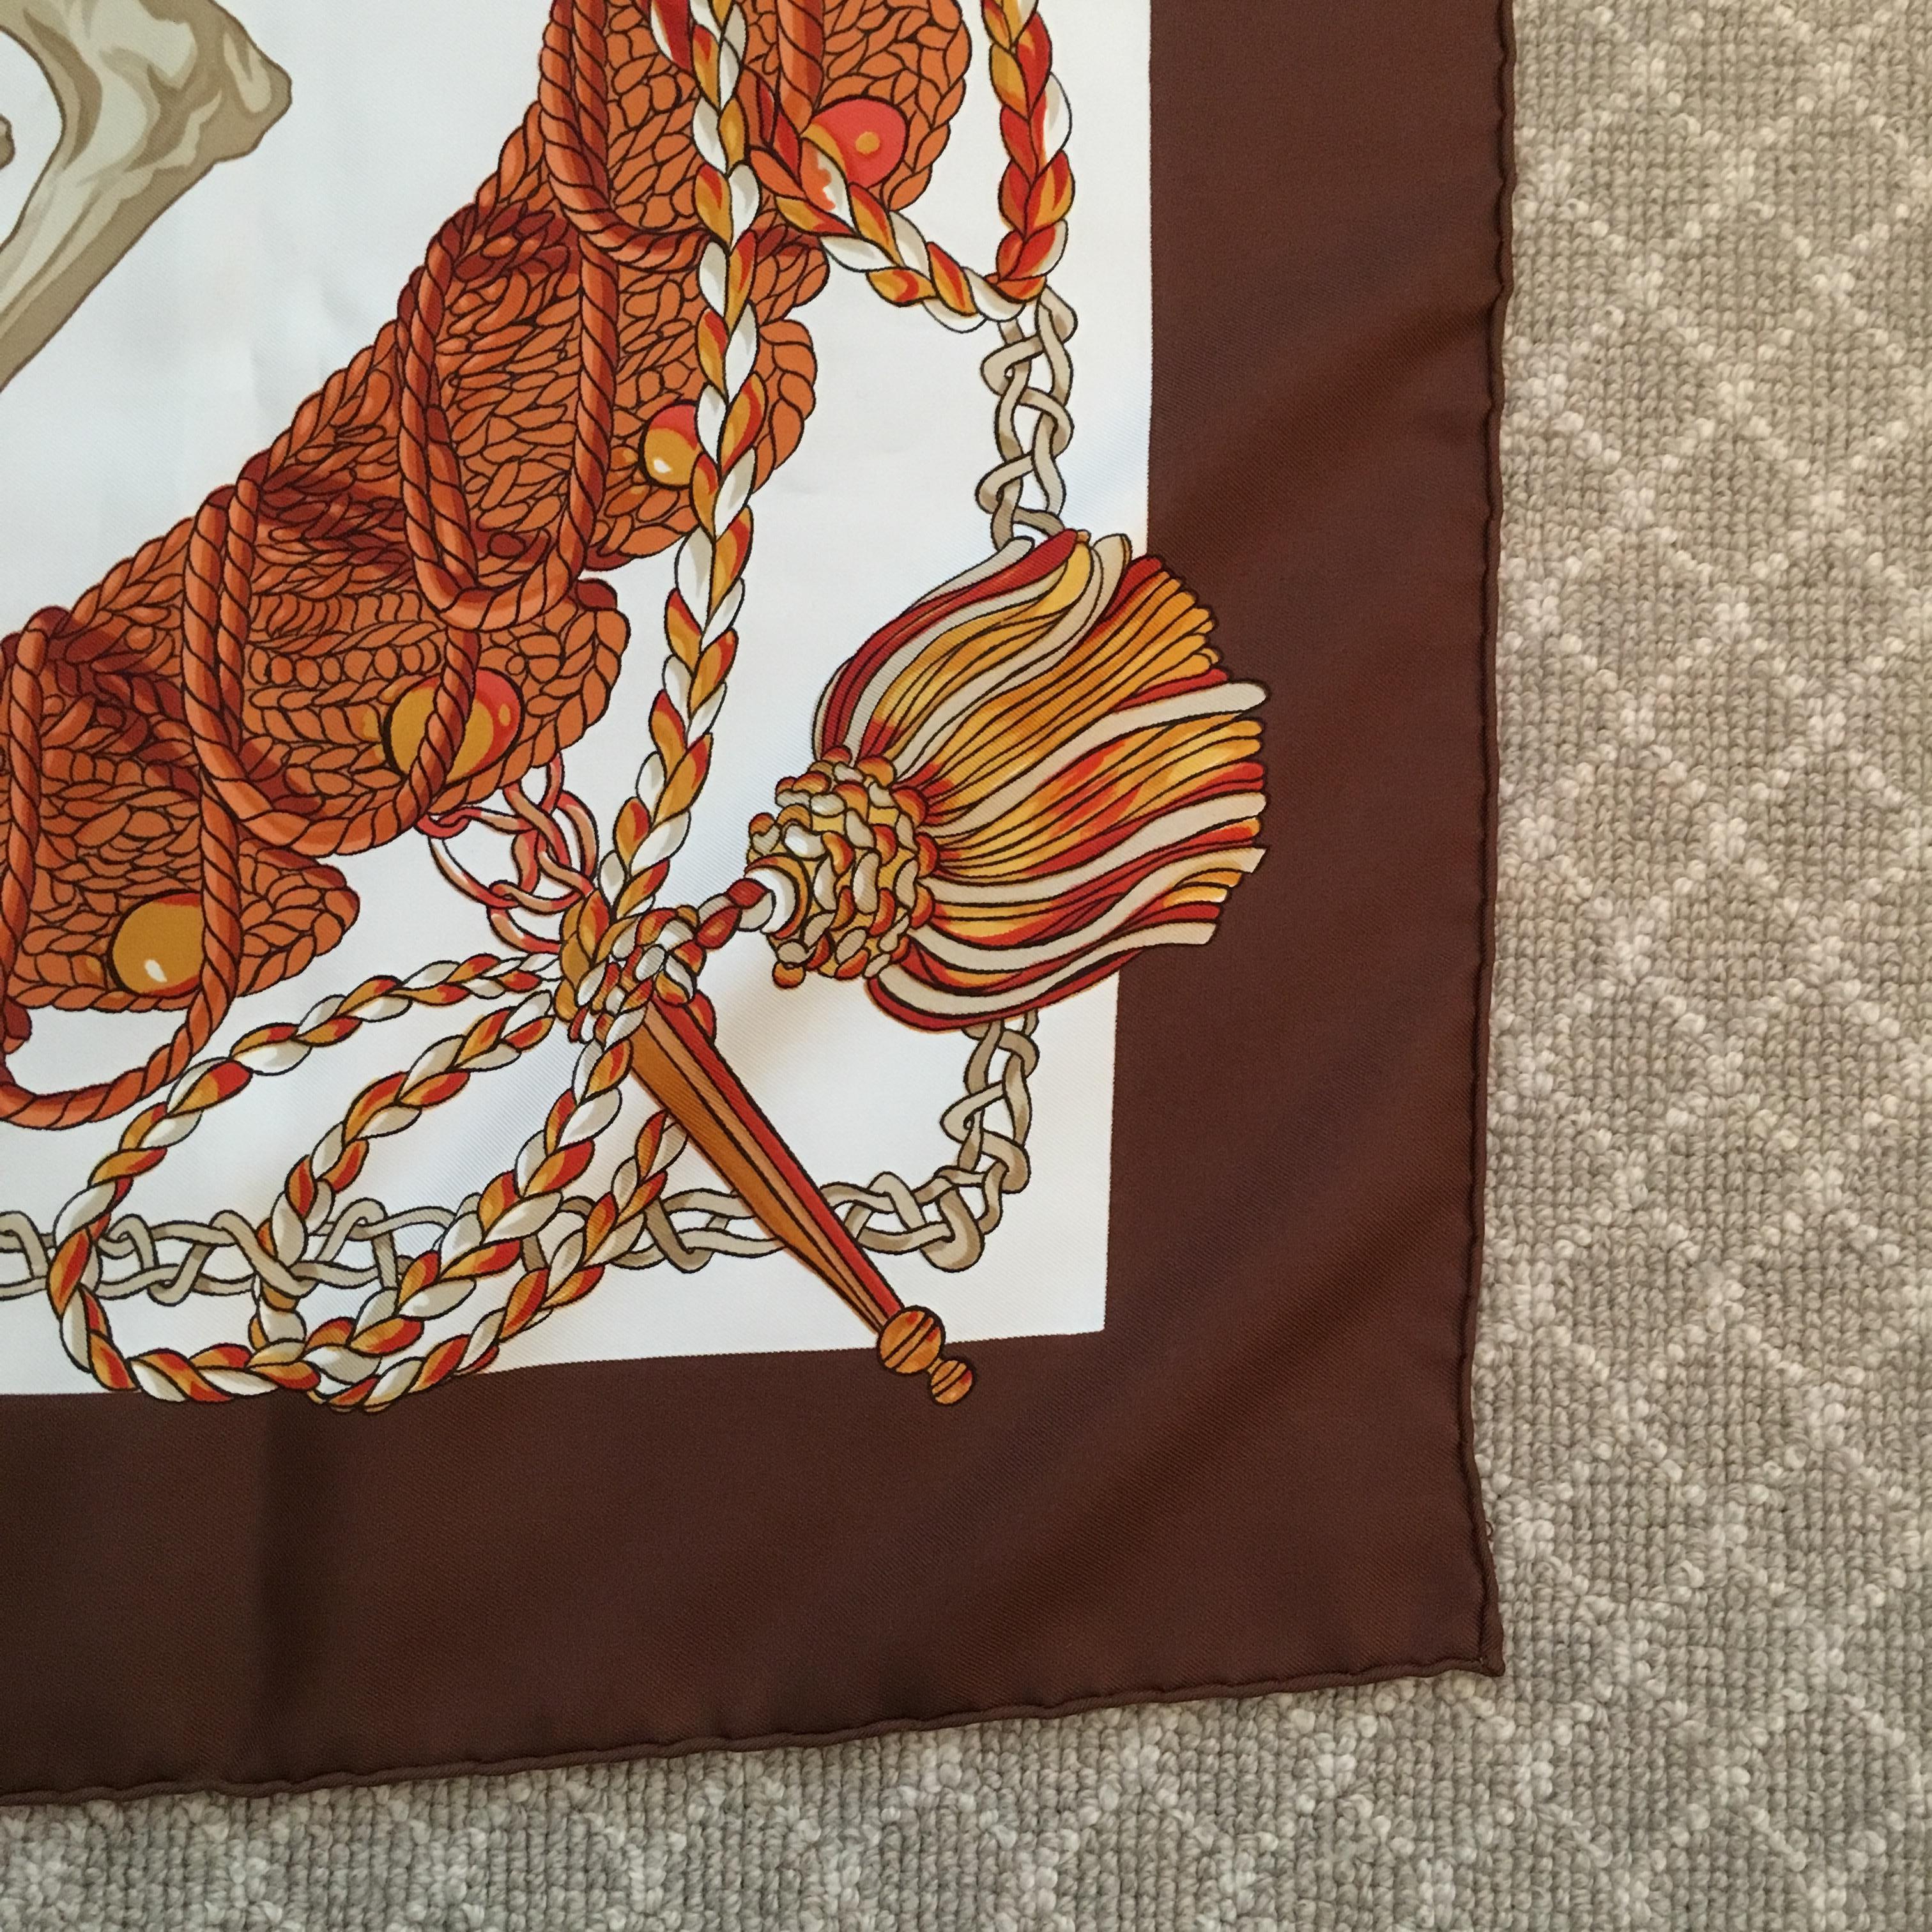 Hermes Scarf Le Timbalier by Francoise Heron 1961 in Box 90cm 2